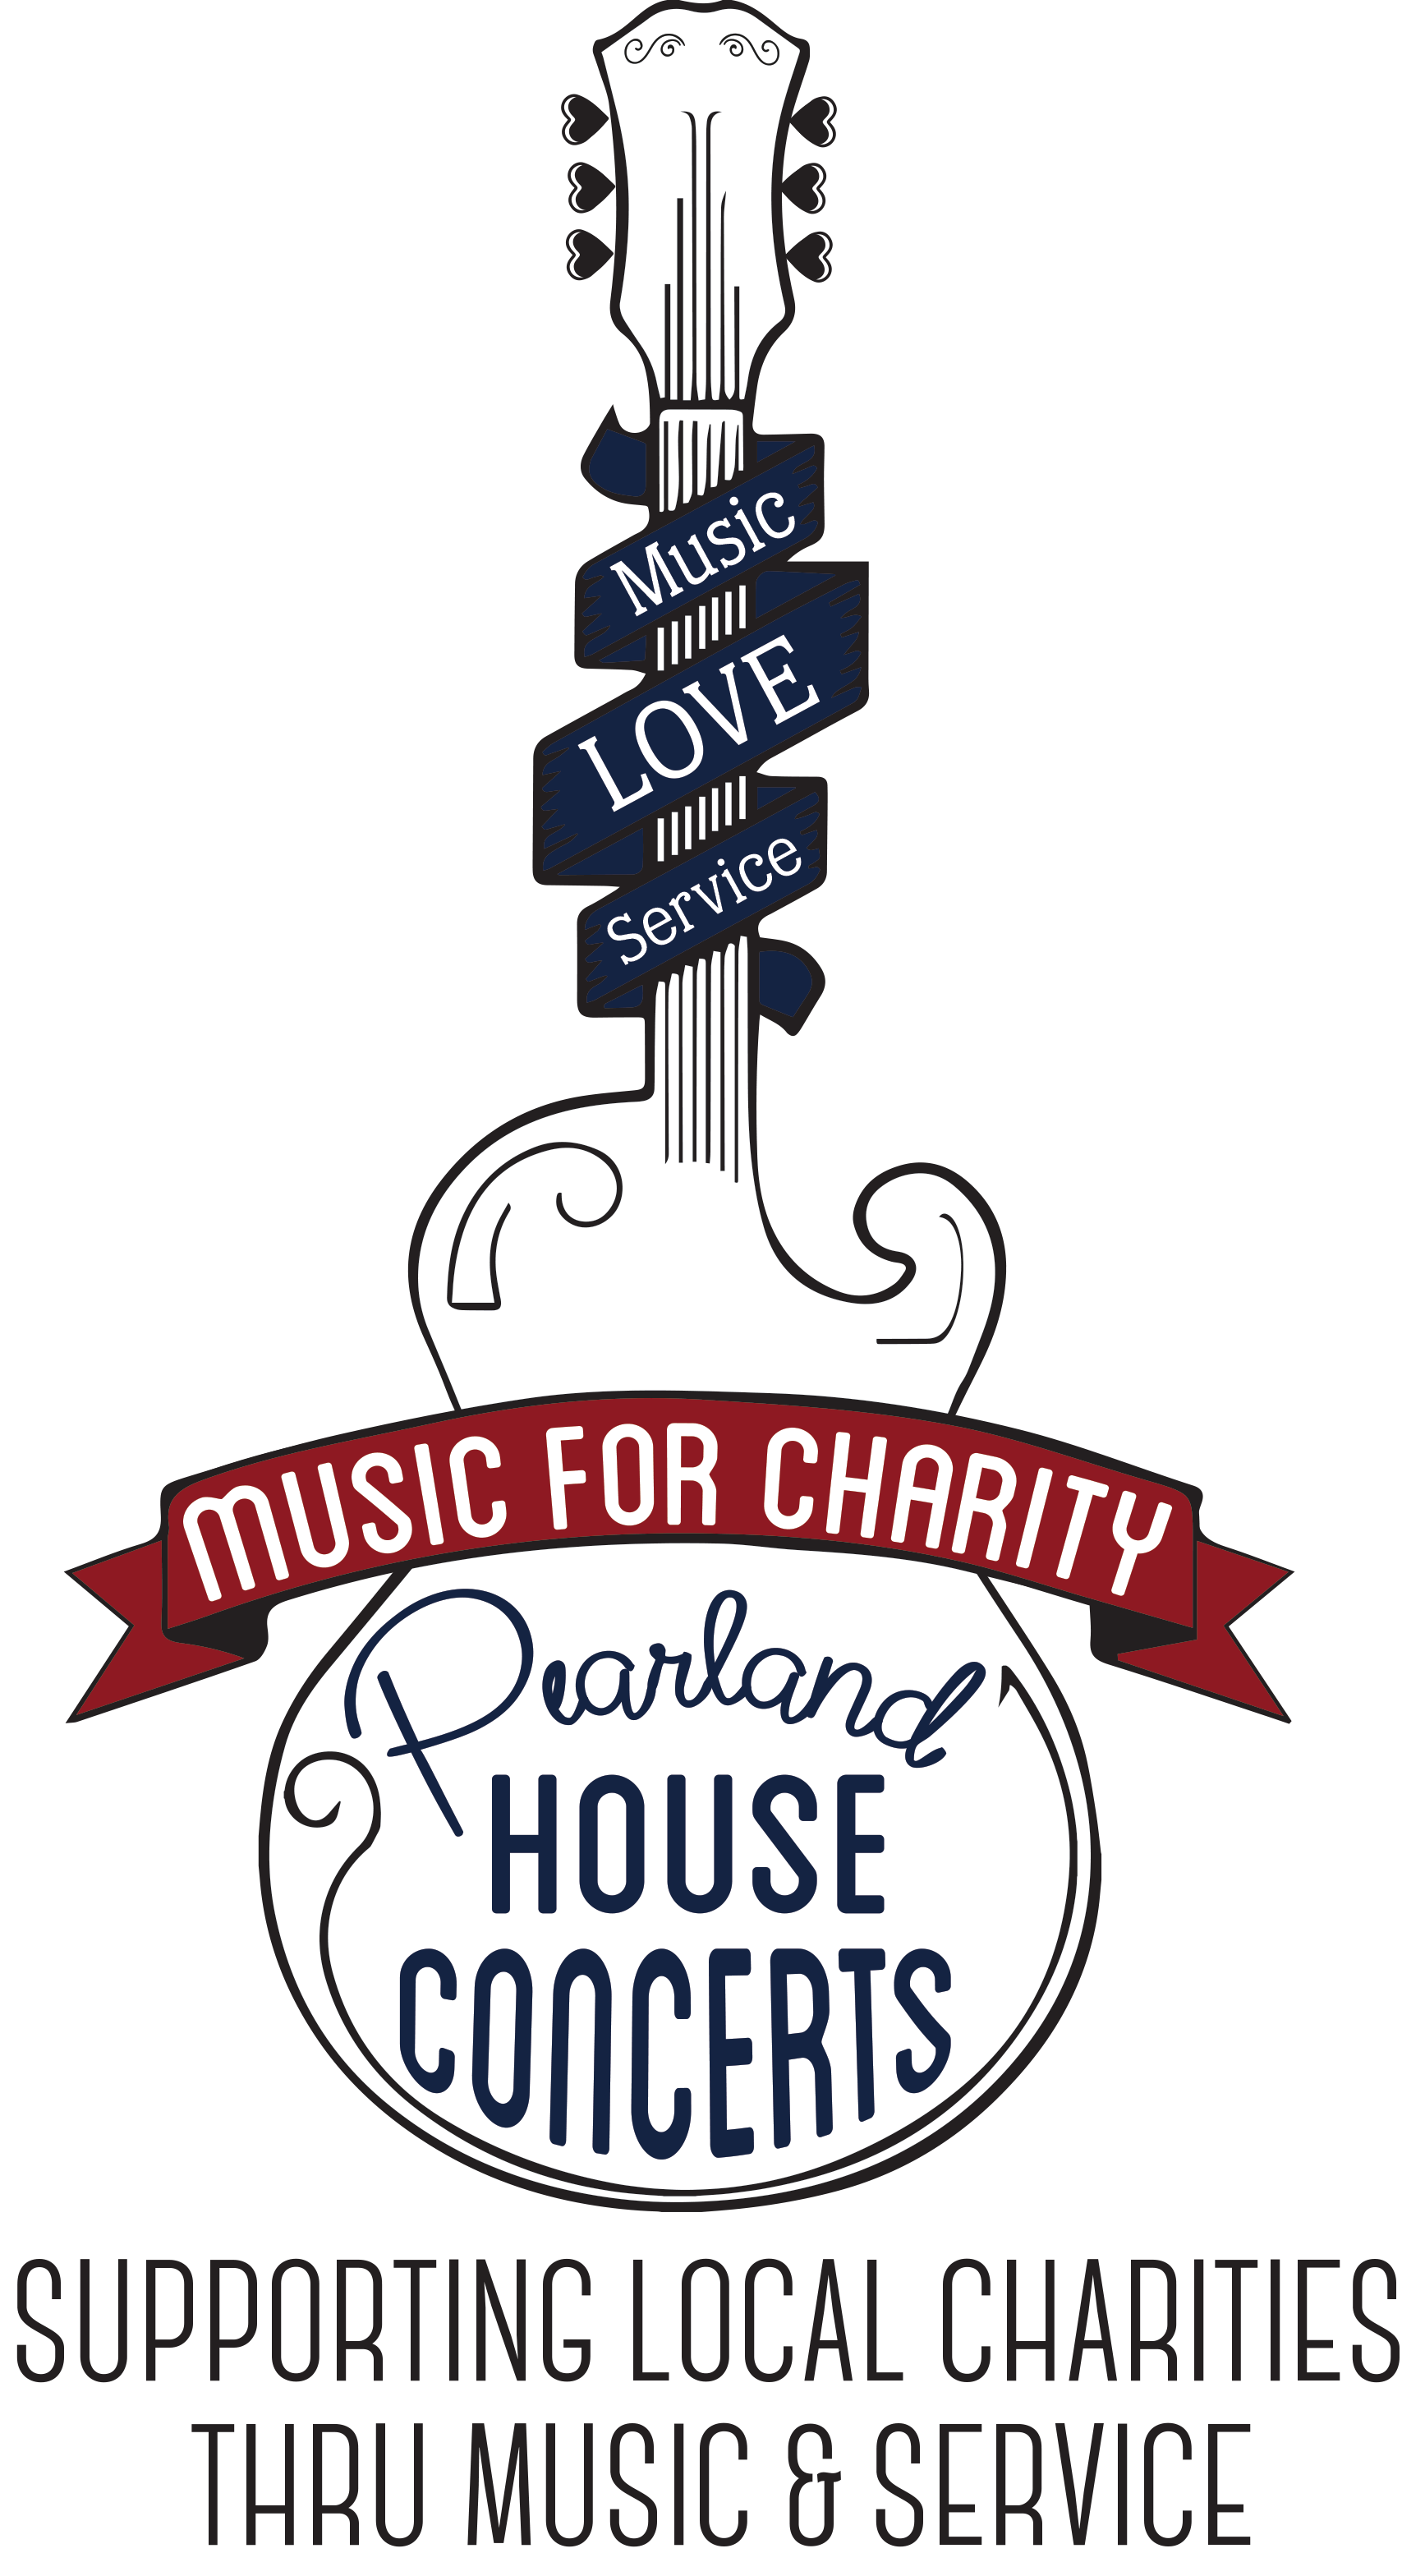 pearland house concerts